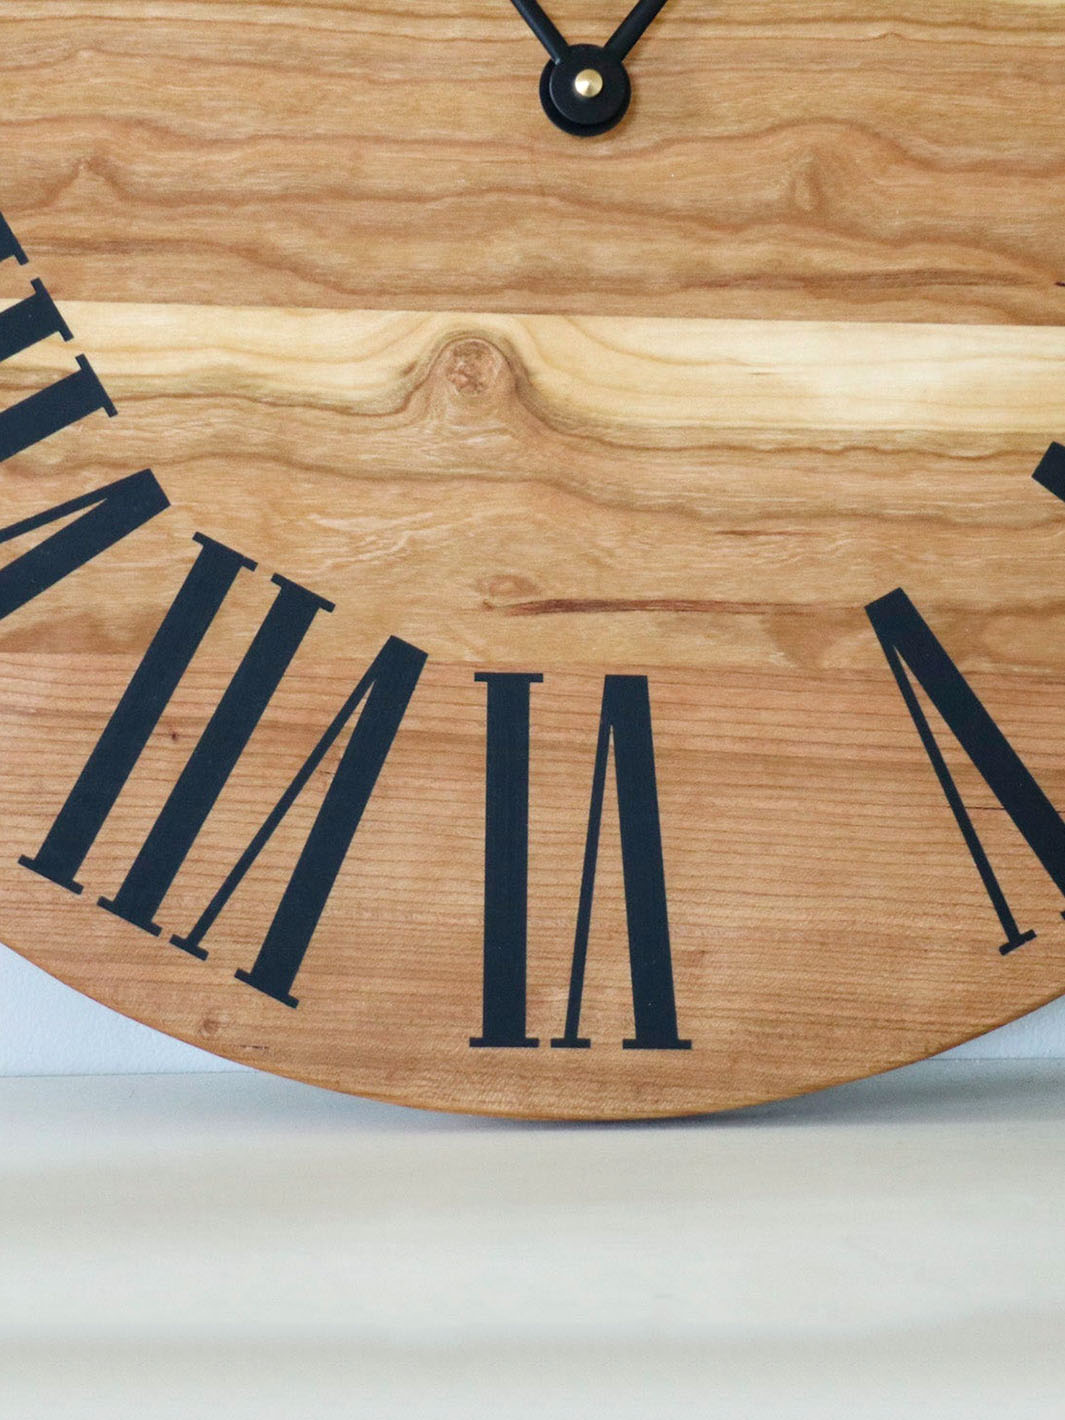 Sappy 18" Solid Cherry Hardwood Wall Clock with Black Roman Numerals (in stock)